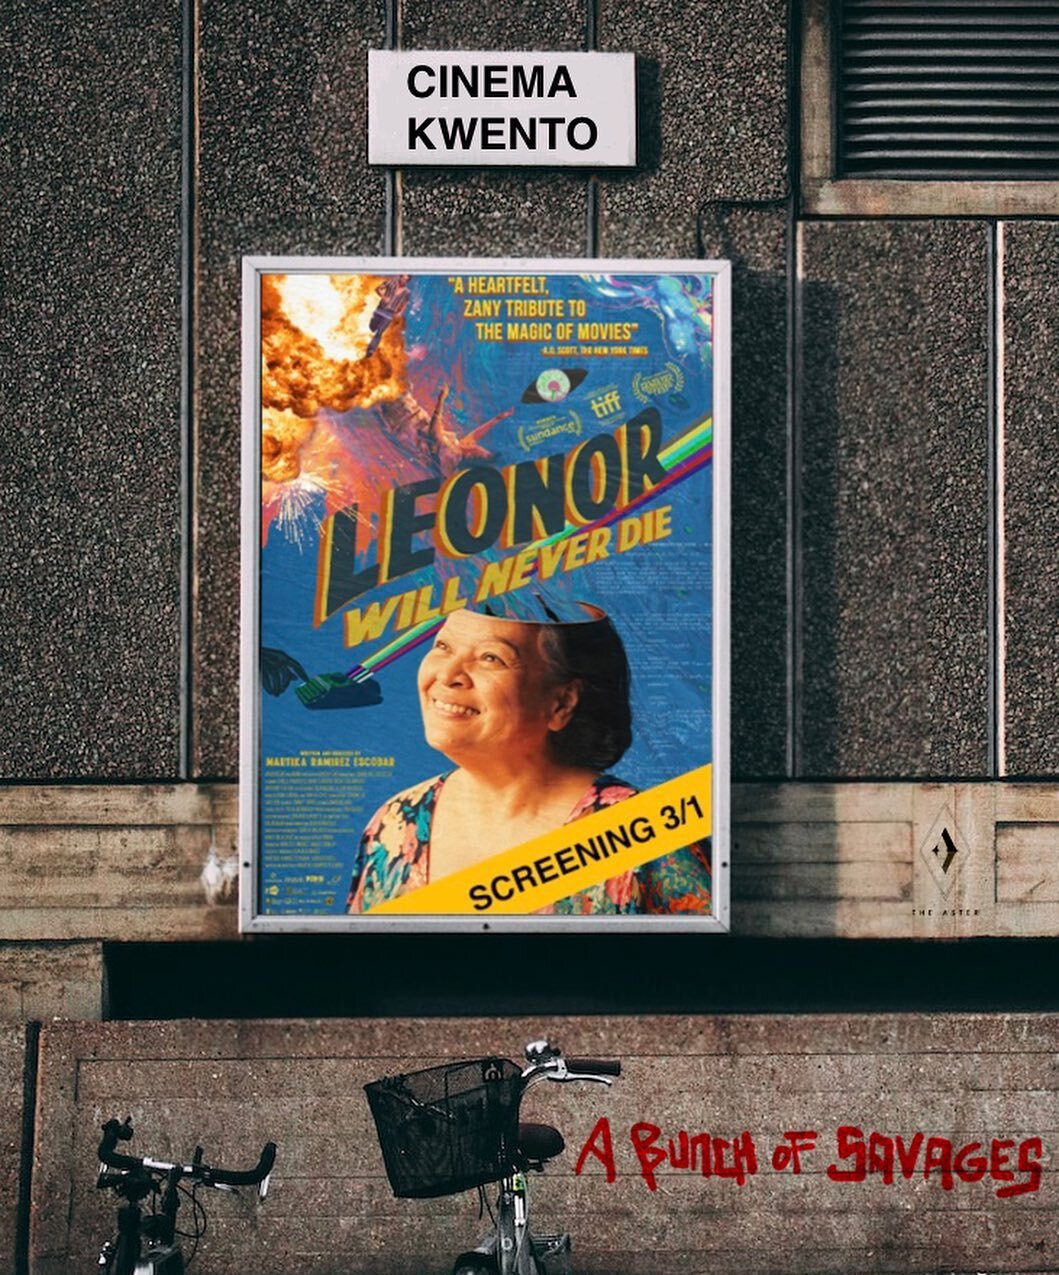 Wanna see a wild Filipinx movie that breaks genre conventions and expands what you think you know about Filipinx cinema? Come see LEONOR WILL NEVER DIE (@leonorwillneverdie)💥

For our next Cinema Kwento, director @martika.escobar will be coming thro